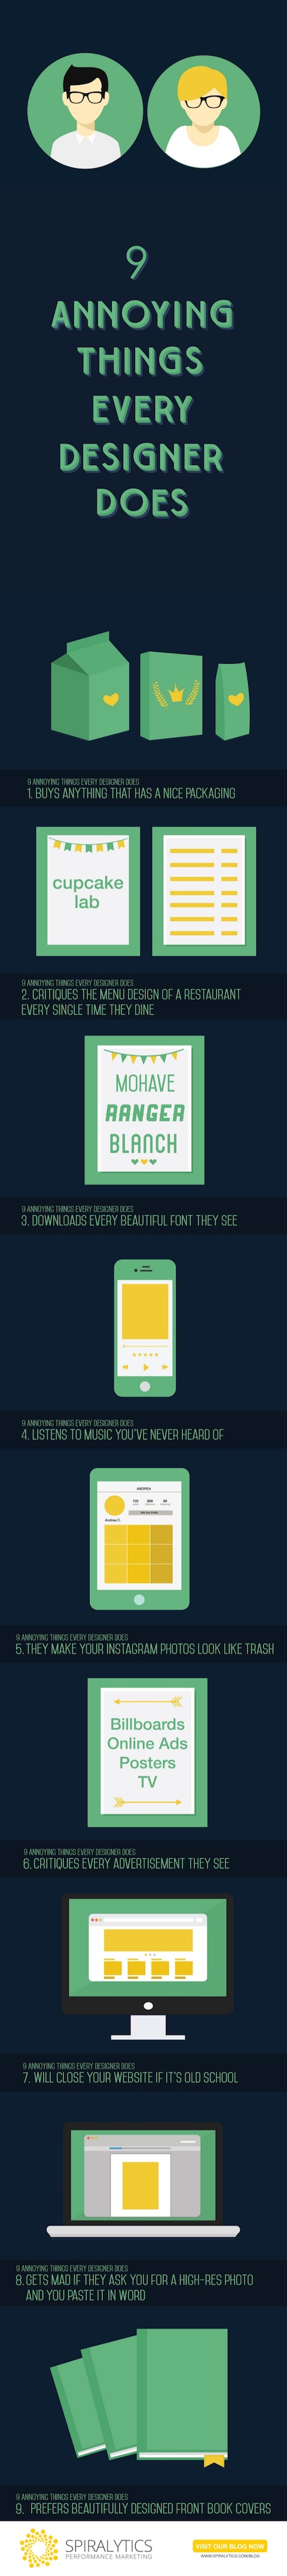 9-annoying-things-every-designer-does-infographic-1-638